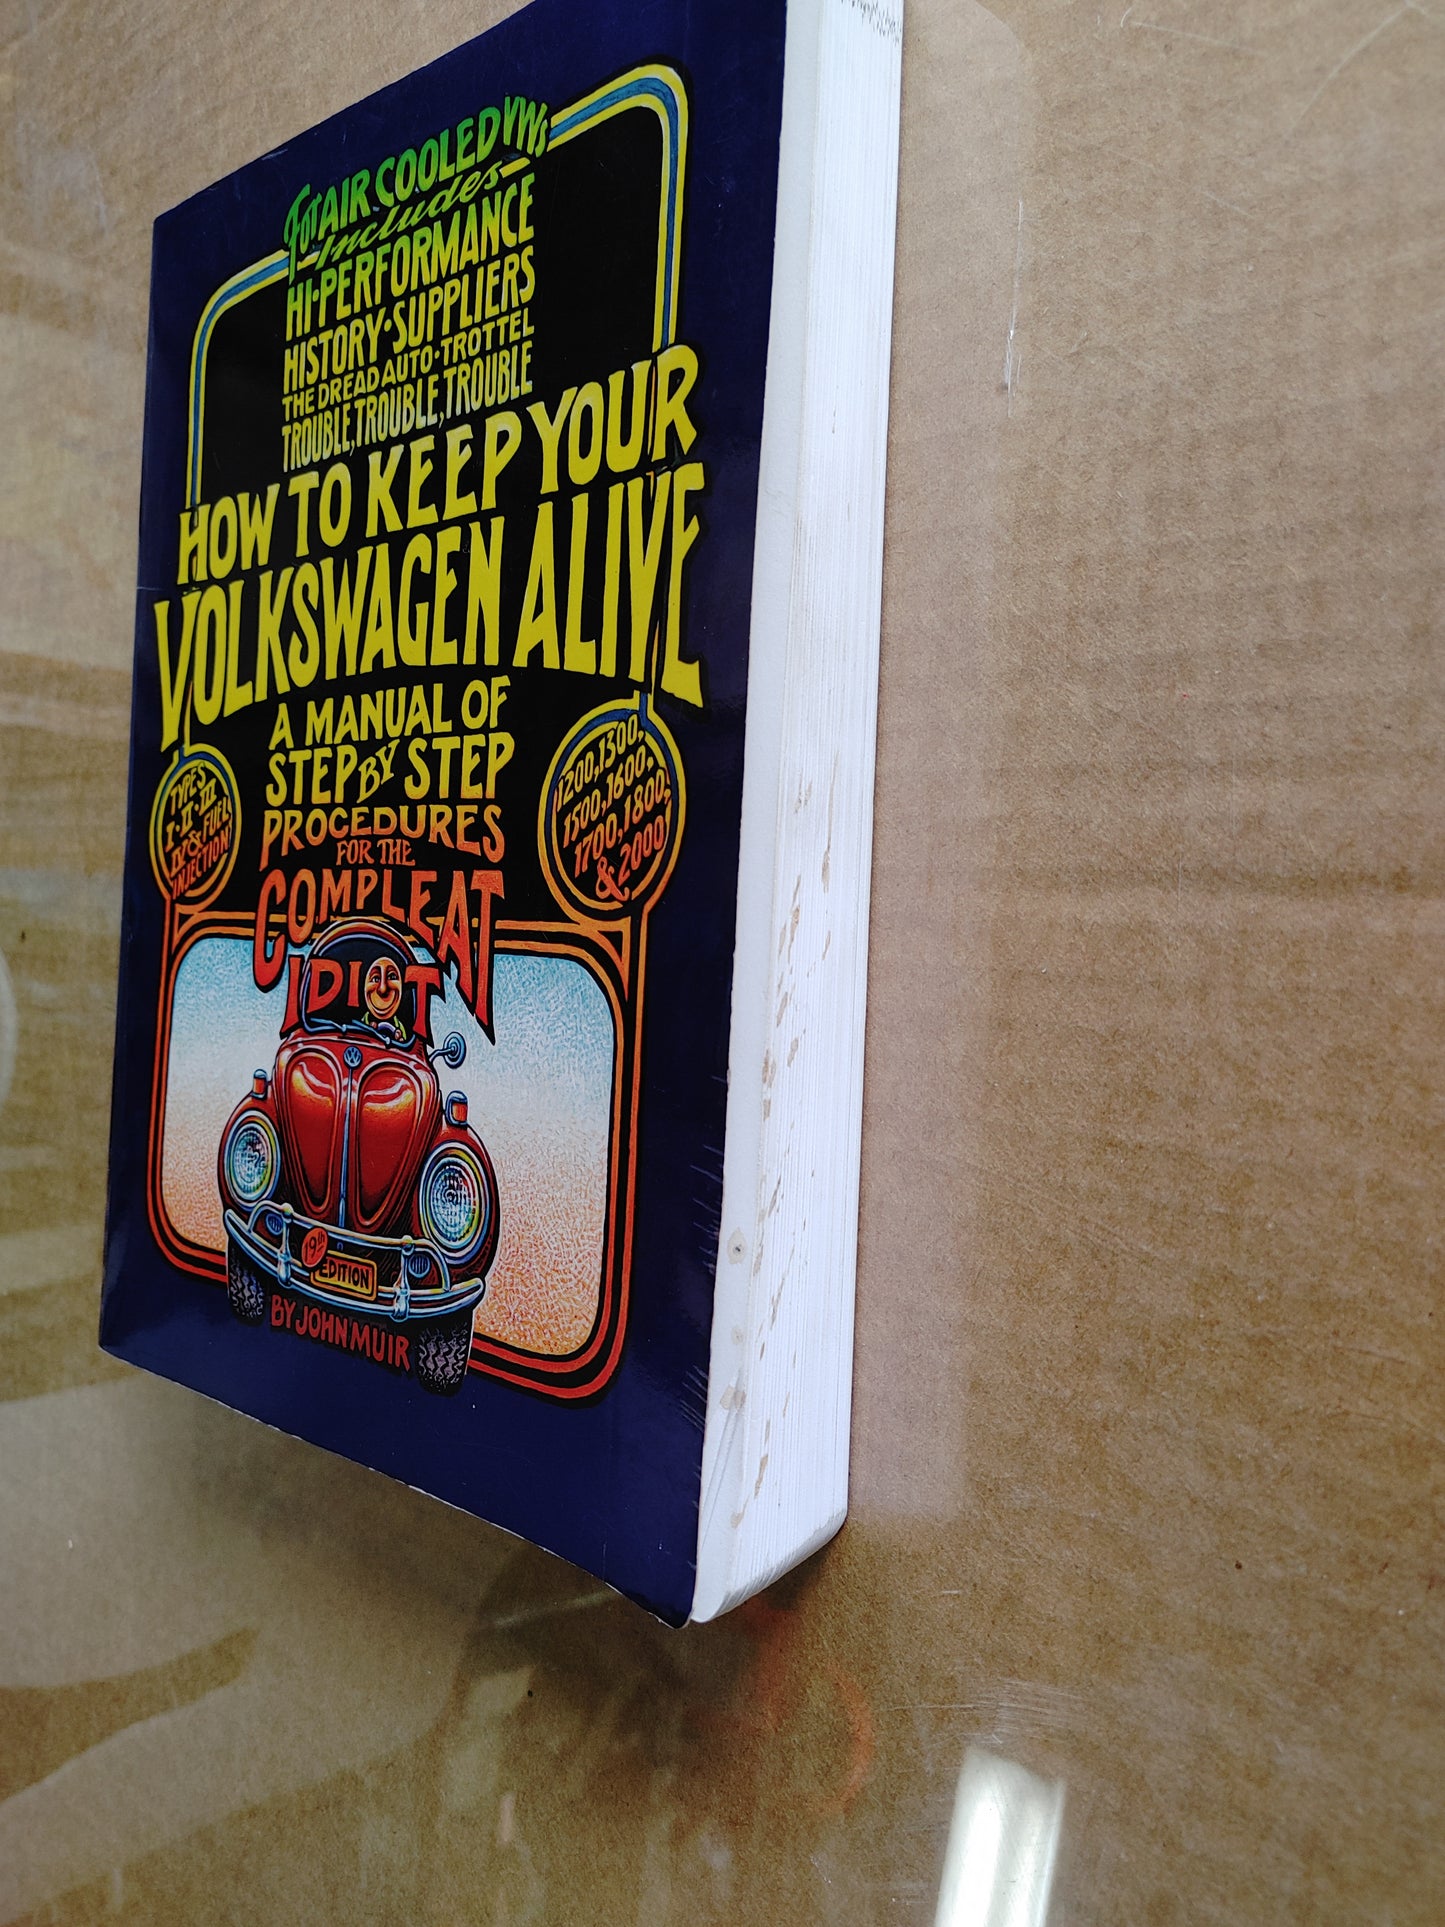 Air Cooled! VW Volkswagon Manual Keep Alive Book Good Condition Free Shipping!